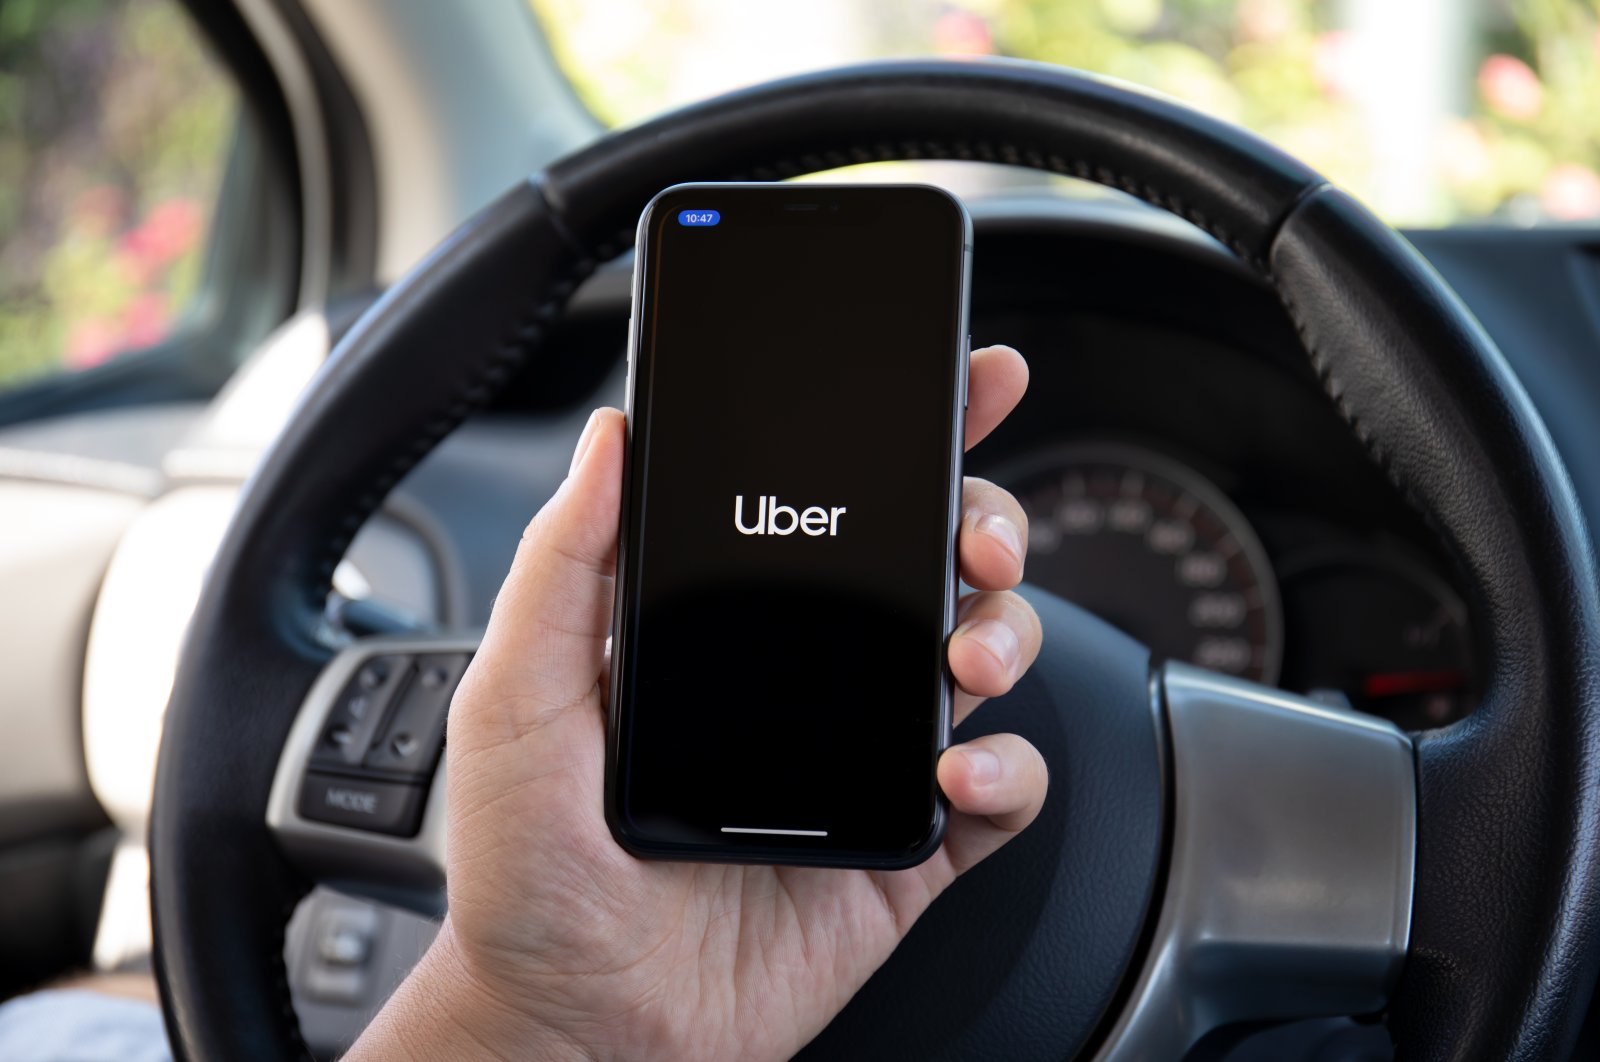 A man holds a mobile phone showing the Uber Taxi application on the screen, Antalya, southern Turkey, Oct. 5, 2020. (Shutterstock Photo)